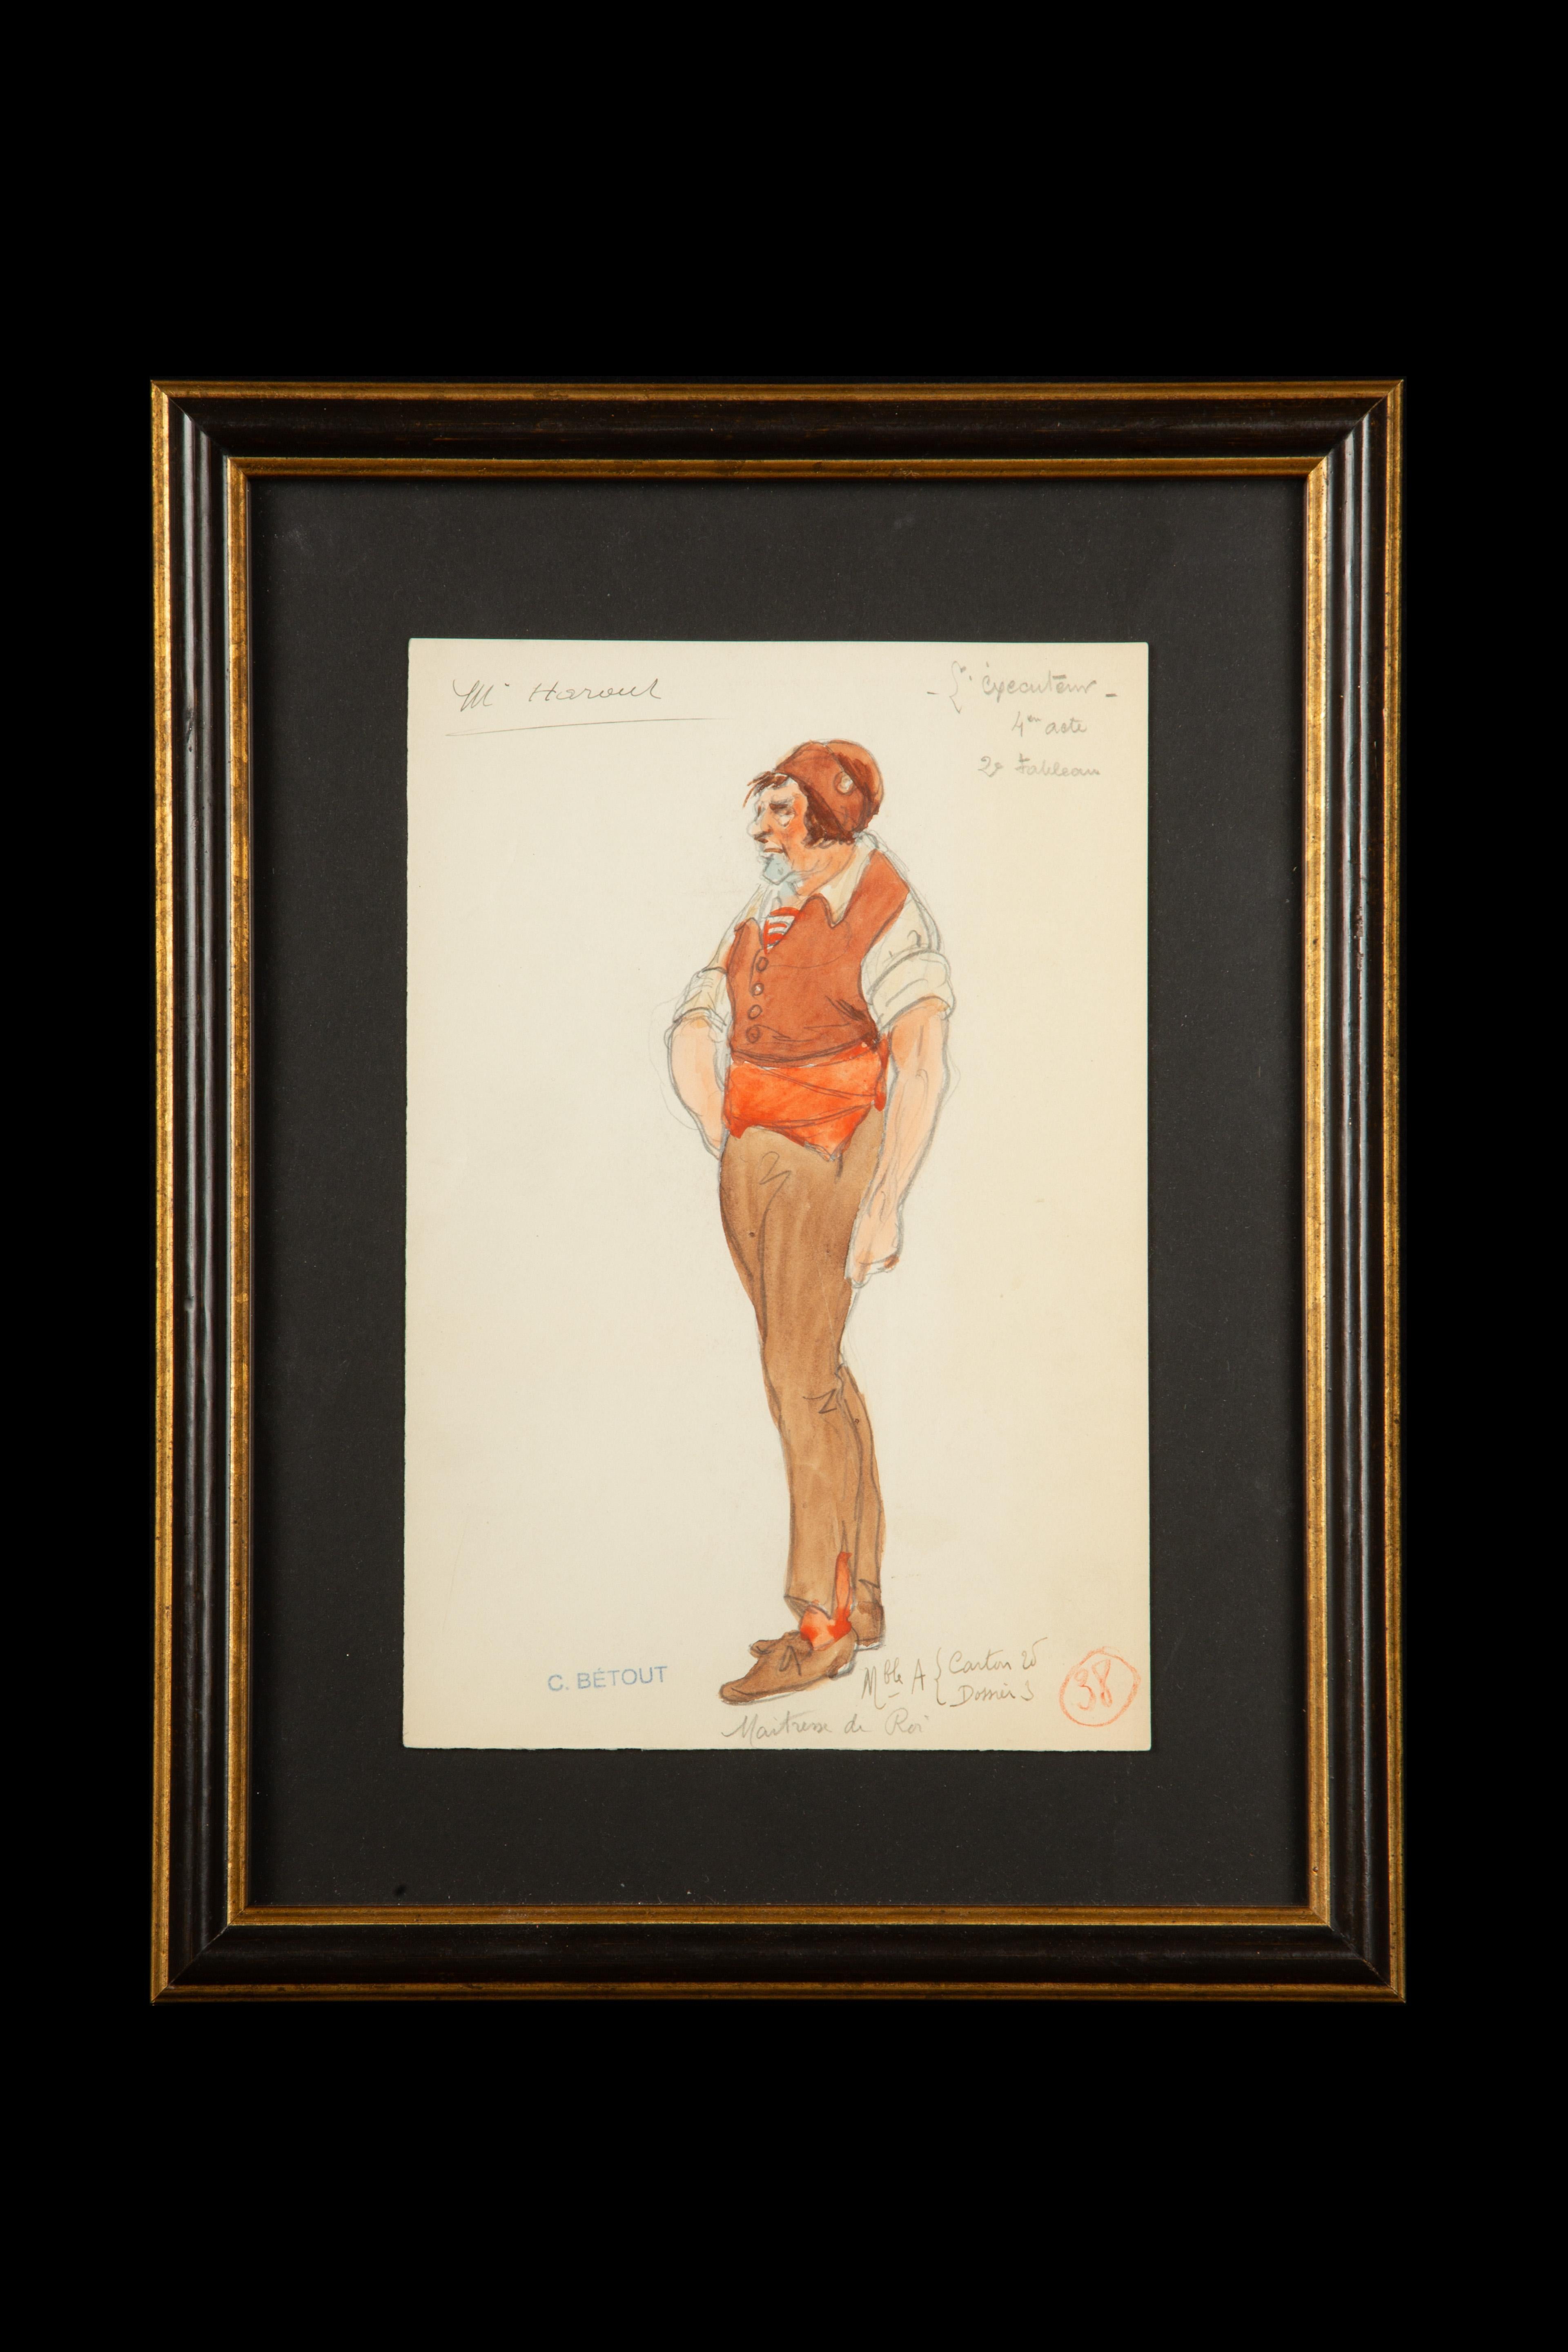 Original watercolor opera costume design by Charles Betout, the principal costume designer for the Comédie-Française in Paris from 1919 til his death in 1939. Betout was renowned for his diligent historical research, and his costumes were in high